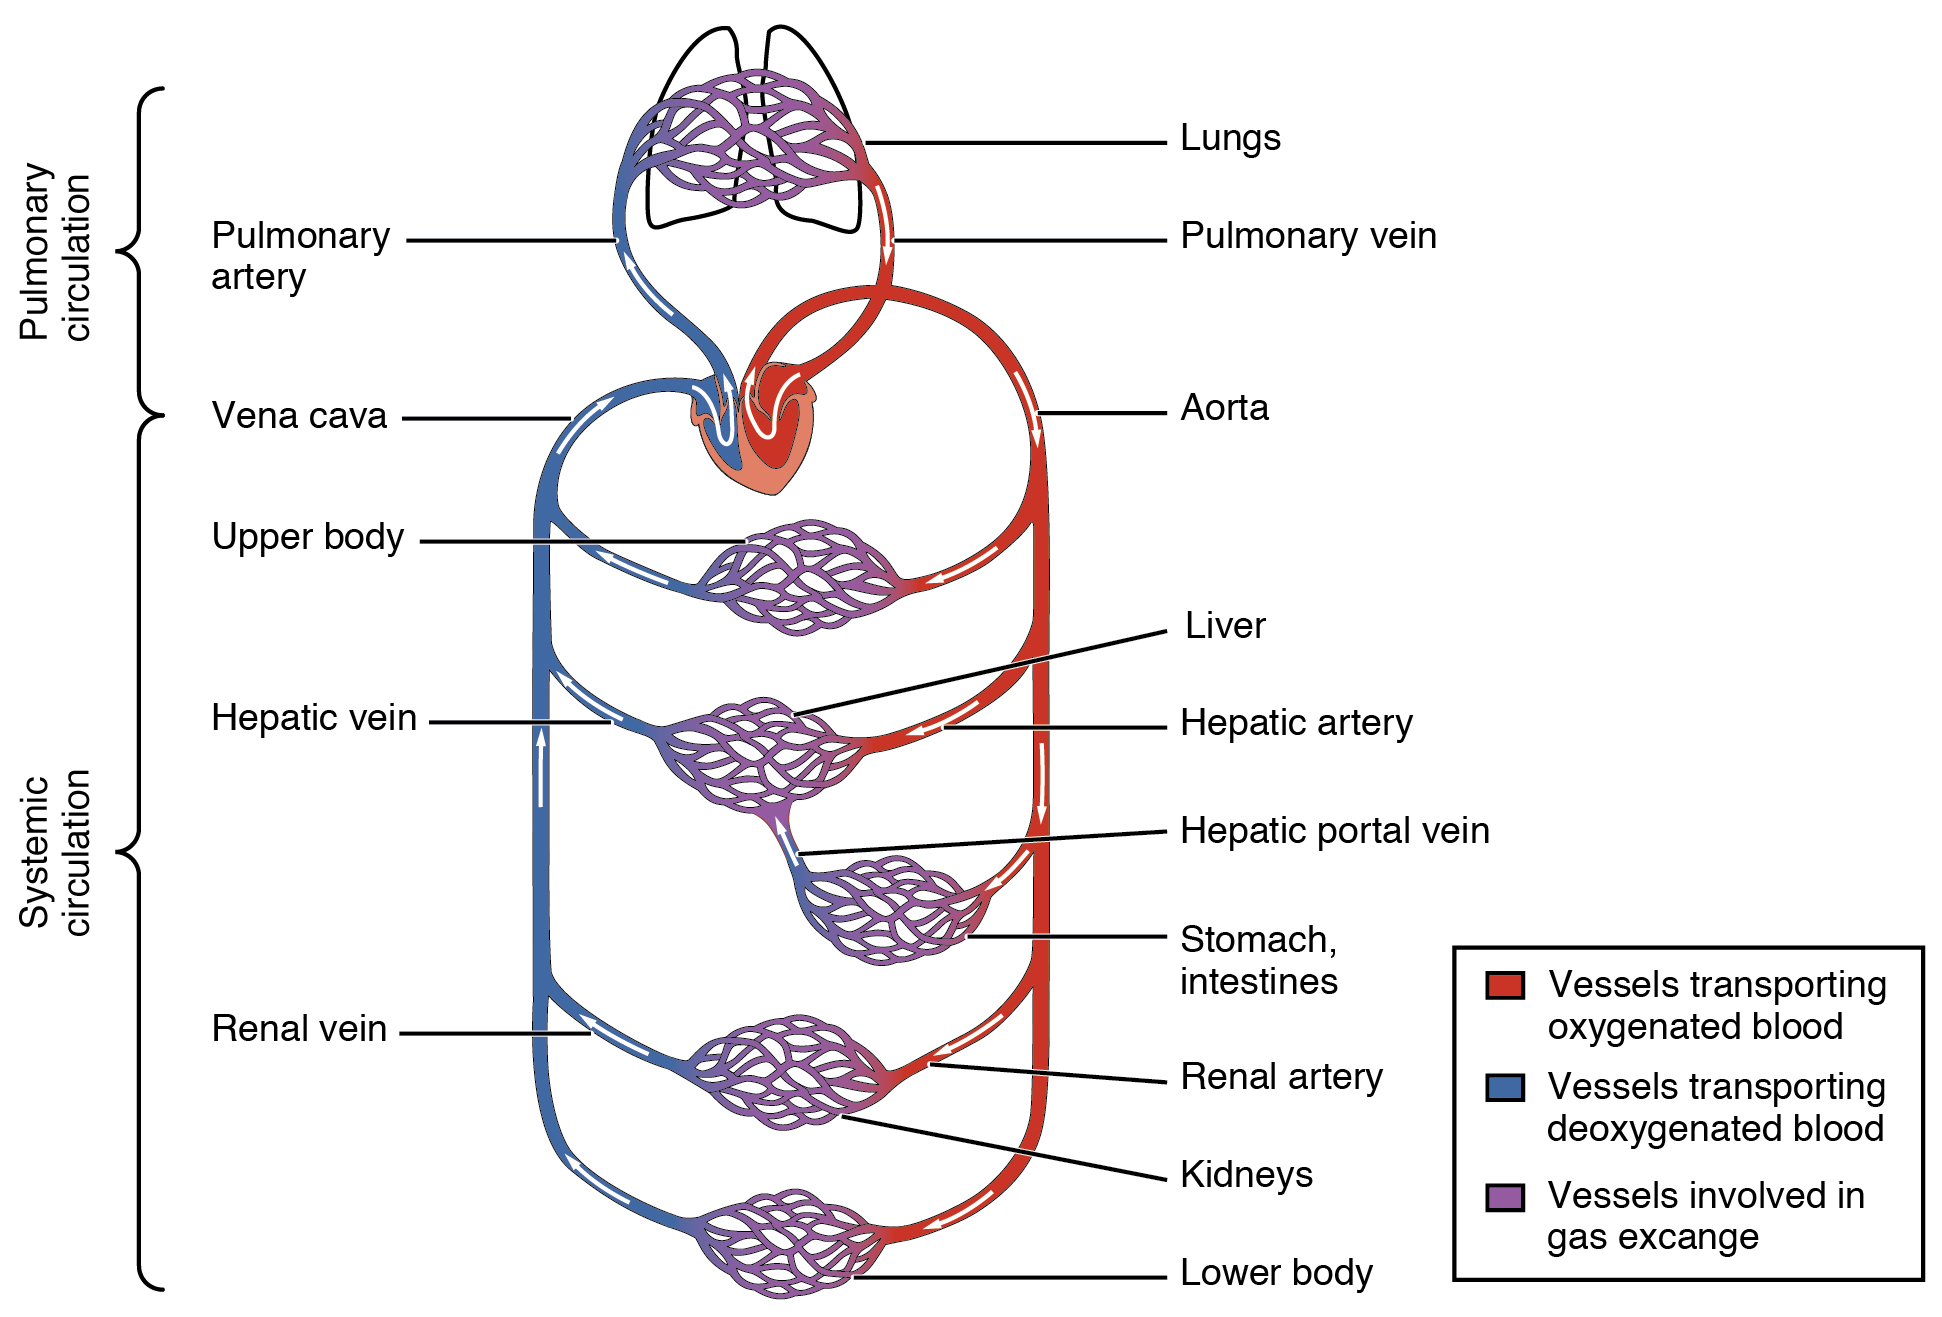 Blood flow through the heart and various organs in the body